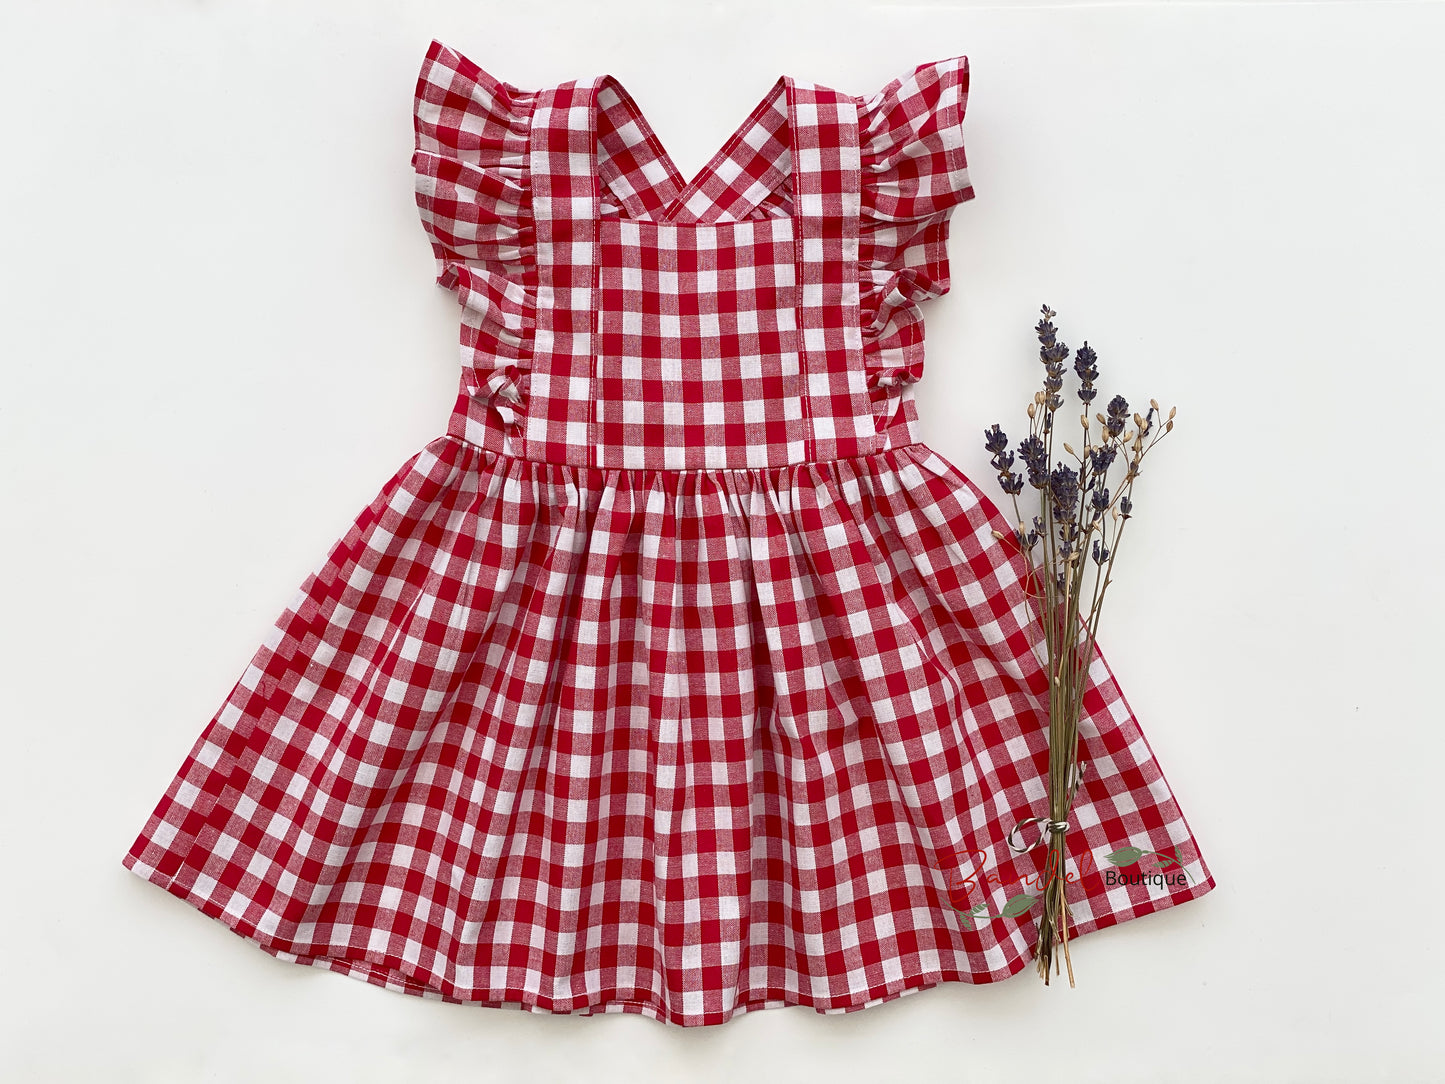 Classic Red Gingham Vintage Dress for girls features adjustable straps, ruffled sleeves, and a full gathered skirt for a timeless look.